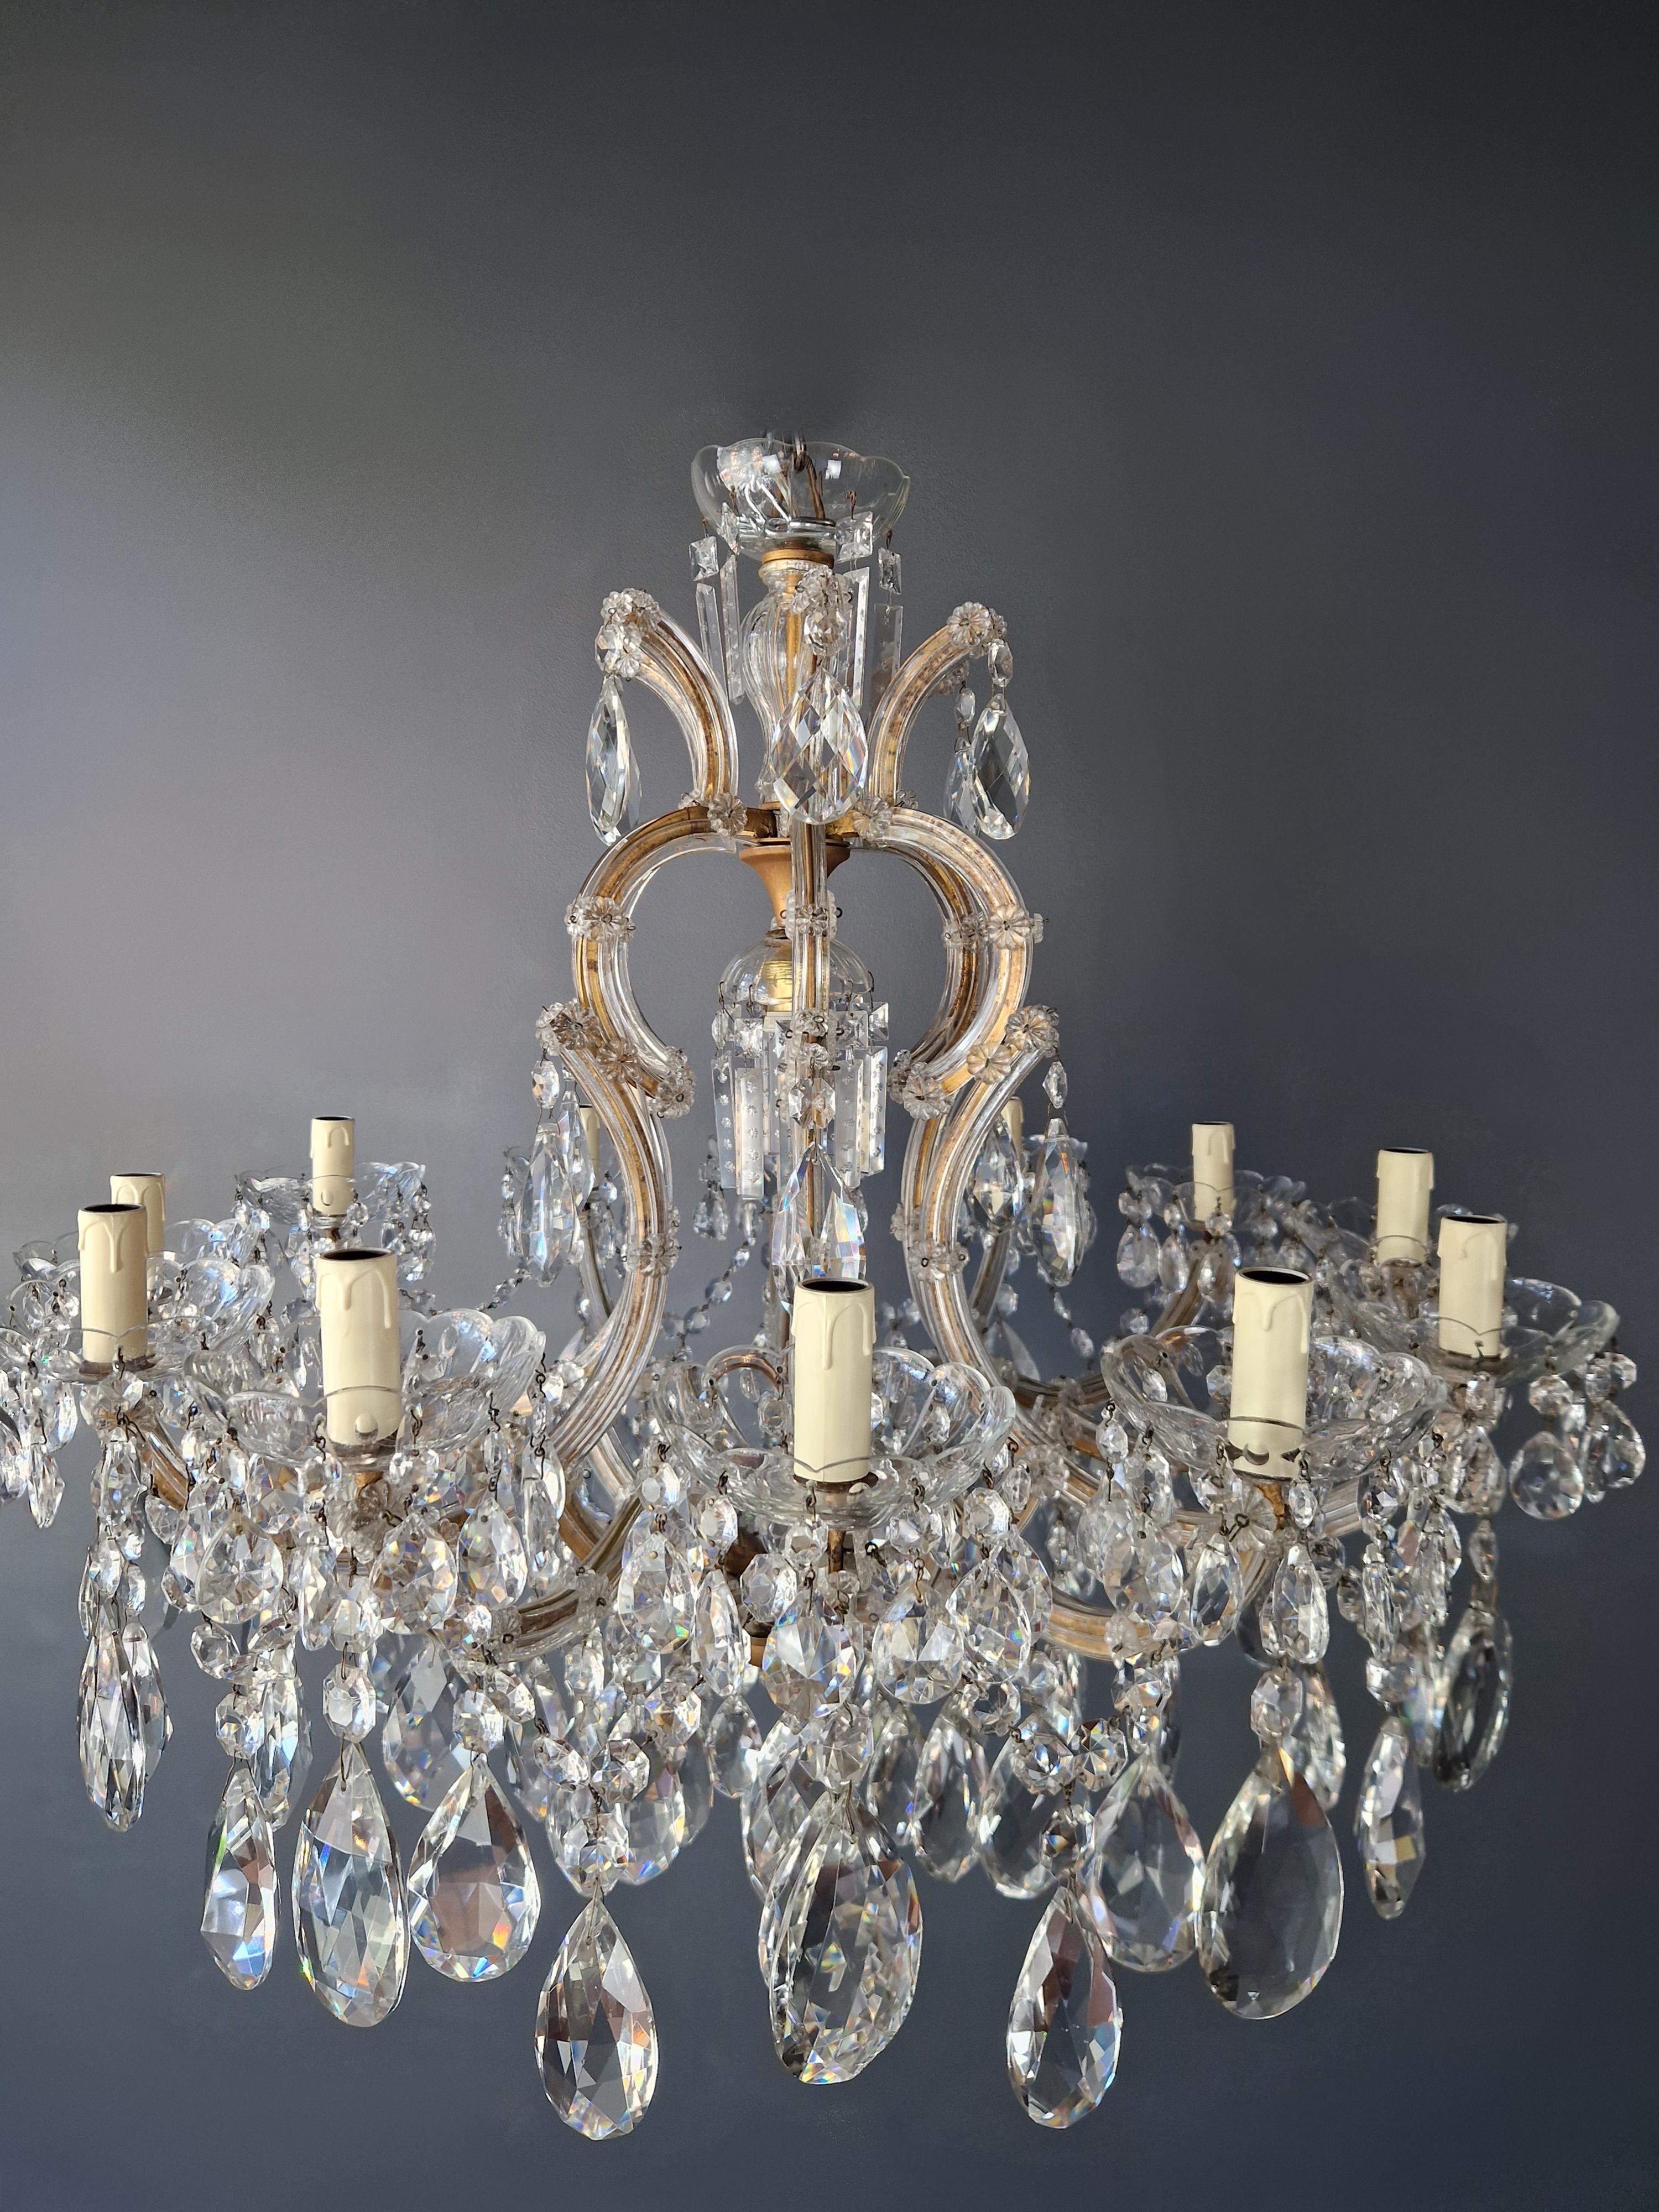 1930s Art Nouveau Maria Theresa Crystal Chandelier lustre Brass Glass  In Good Condition For Sale In Berlin, DE